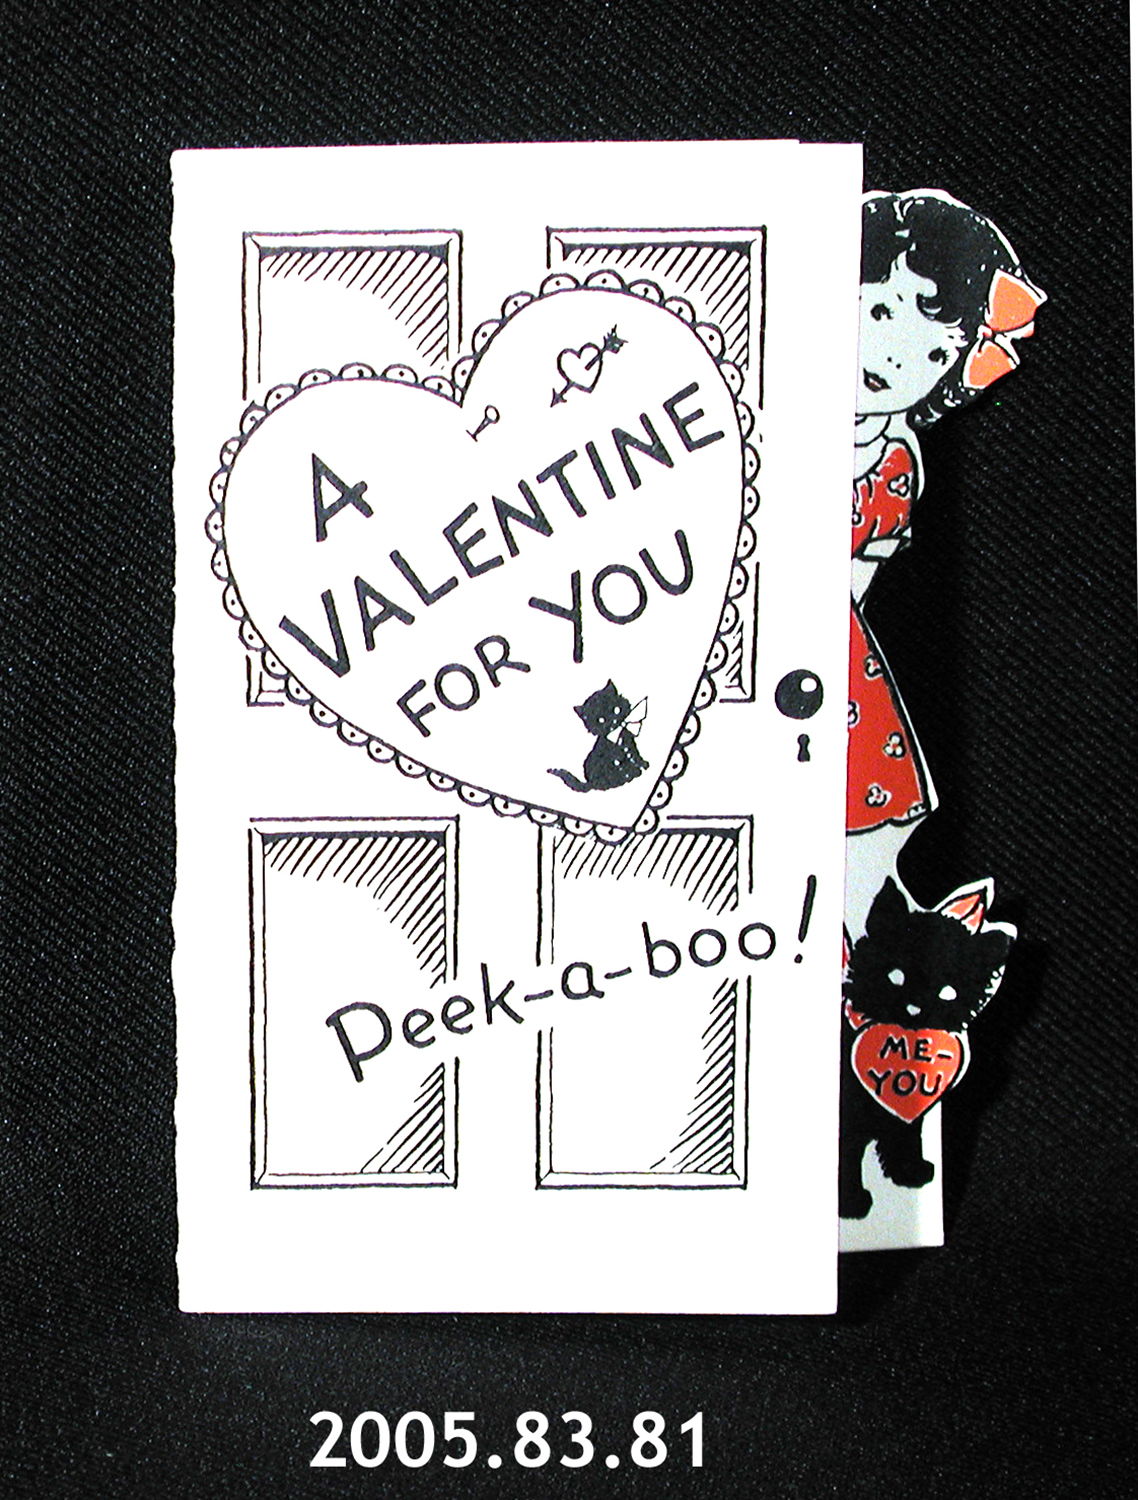 A Valentine card depicting a girl looking around a door. It reads: "Peek-a-boo! A valentine for you!"